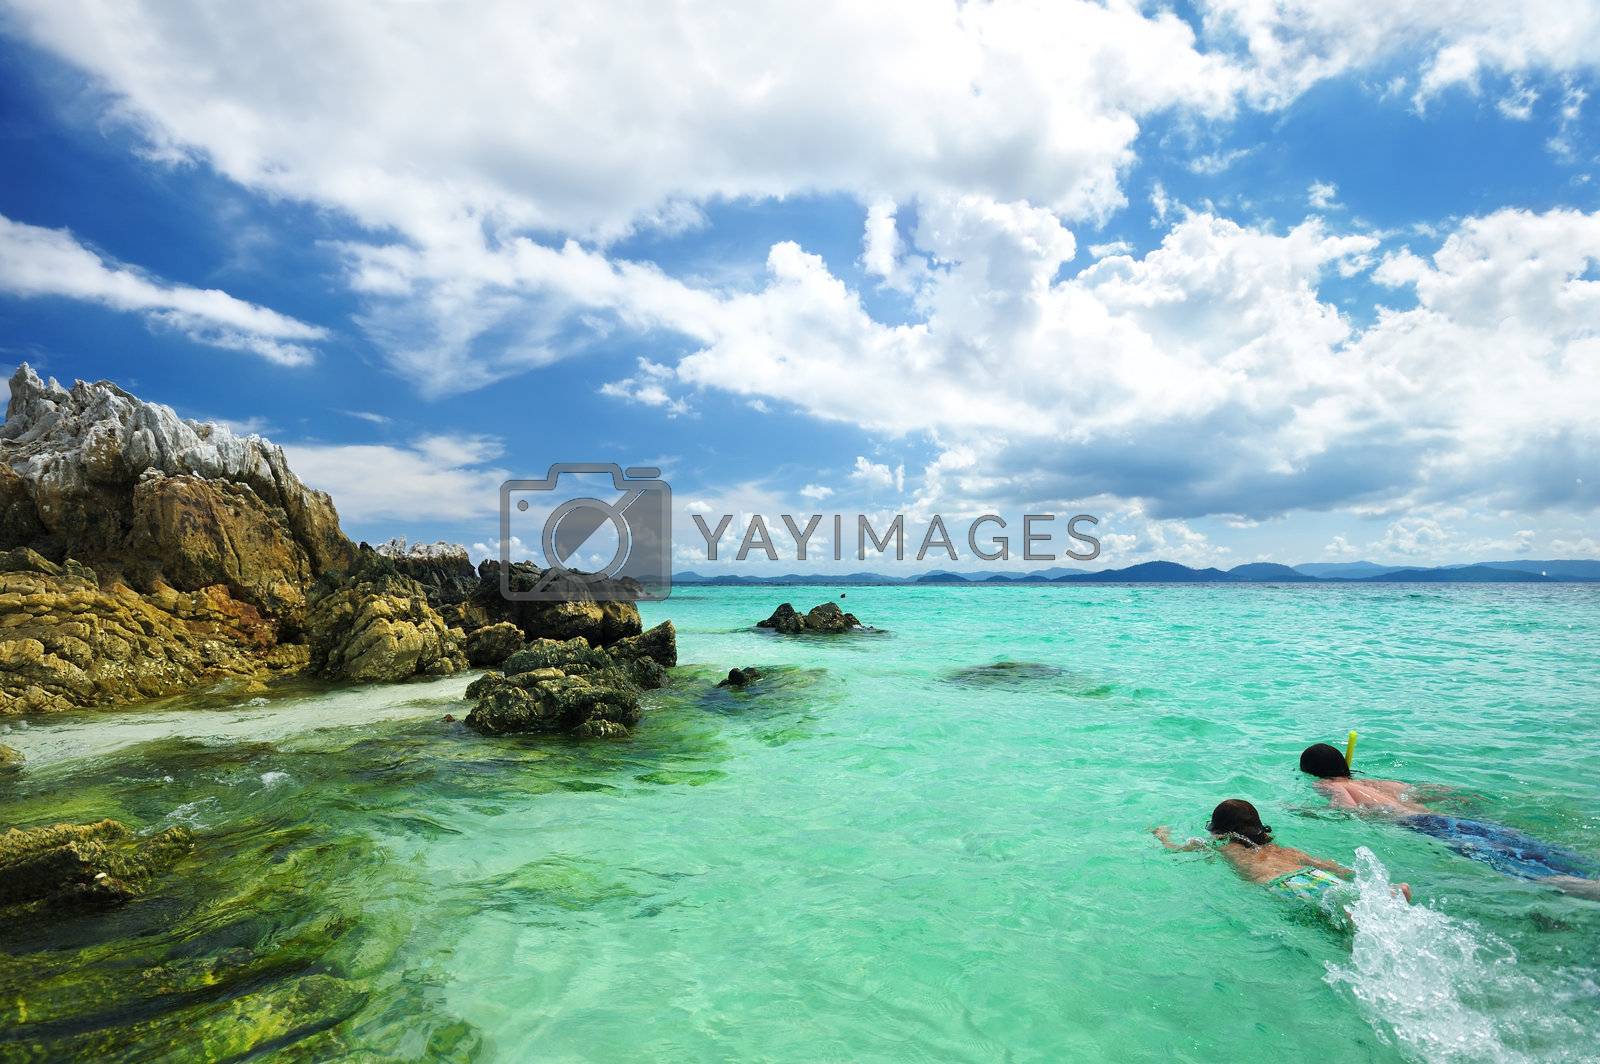 Royalty free image of Boys snorkeling by haveseen